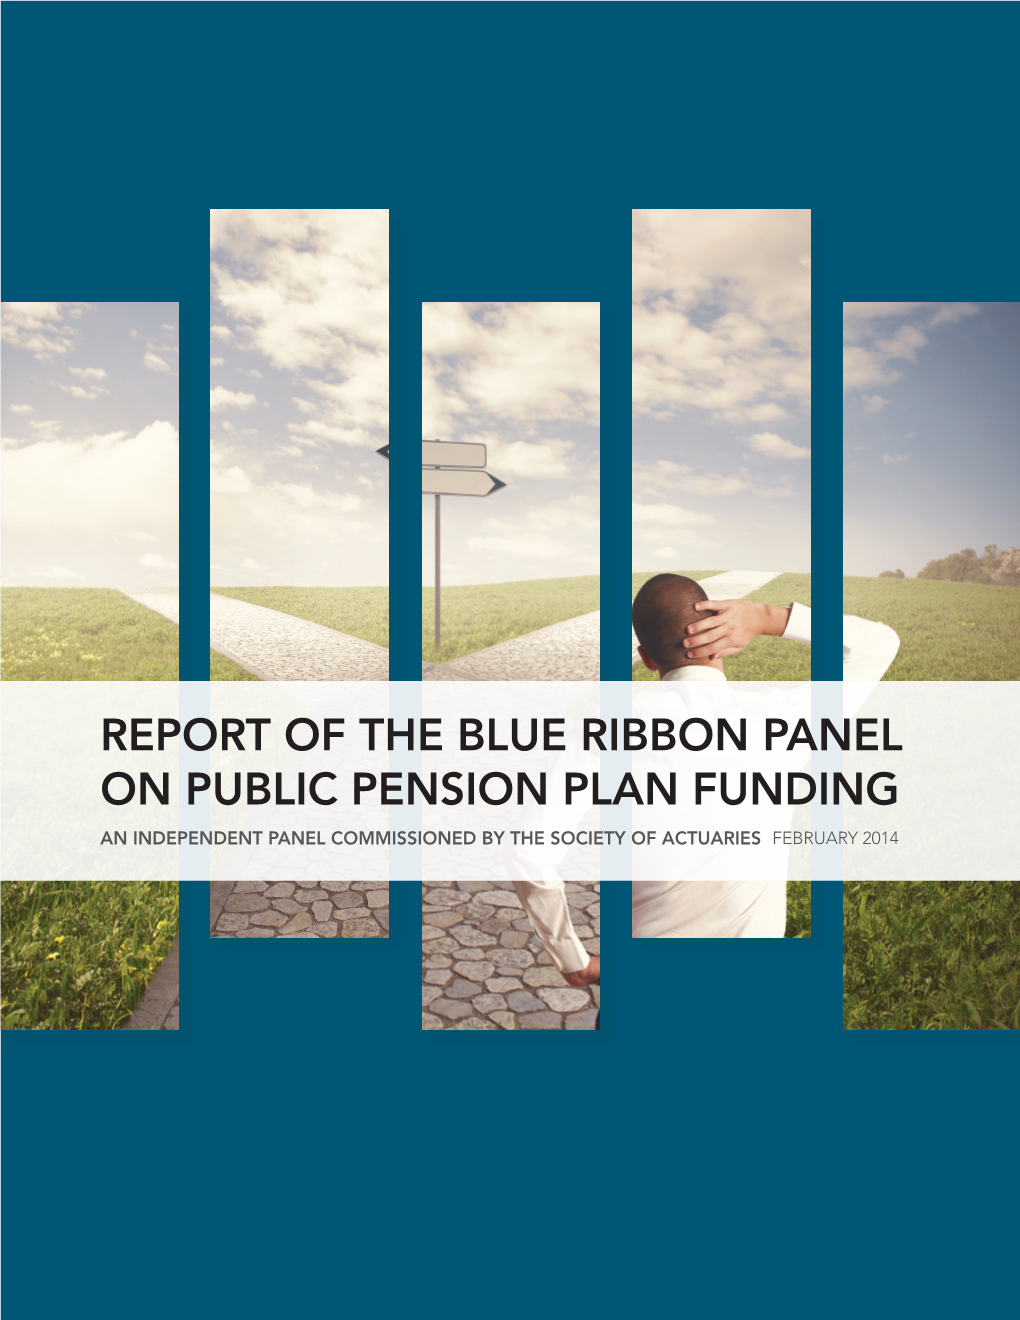 Report of the Blue Ribbon Panel on Public Pension Plan Funding